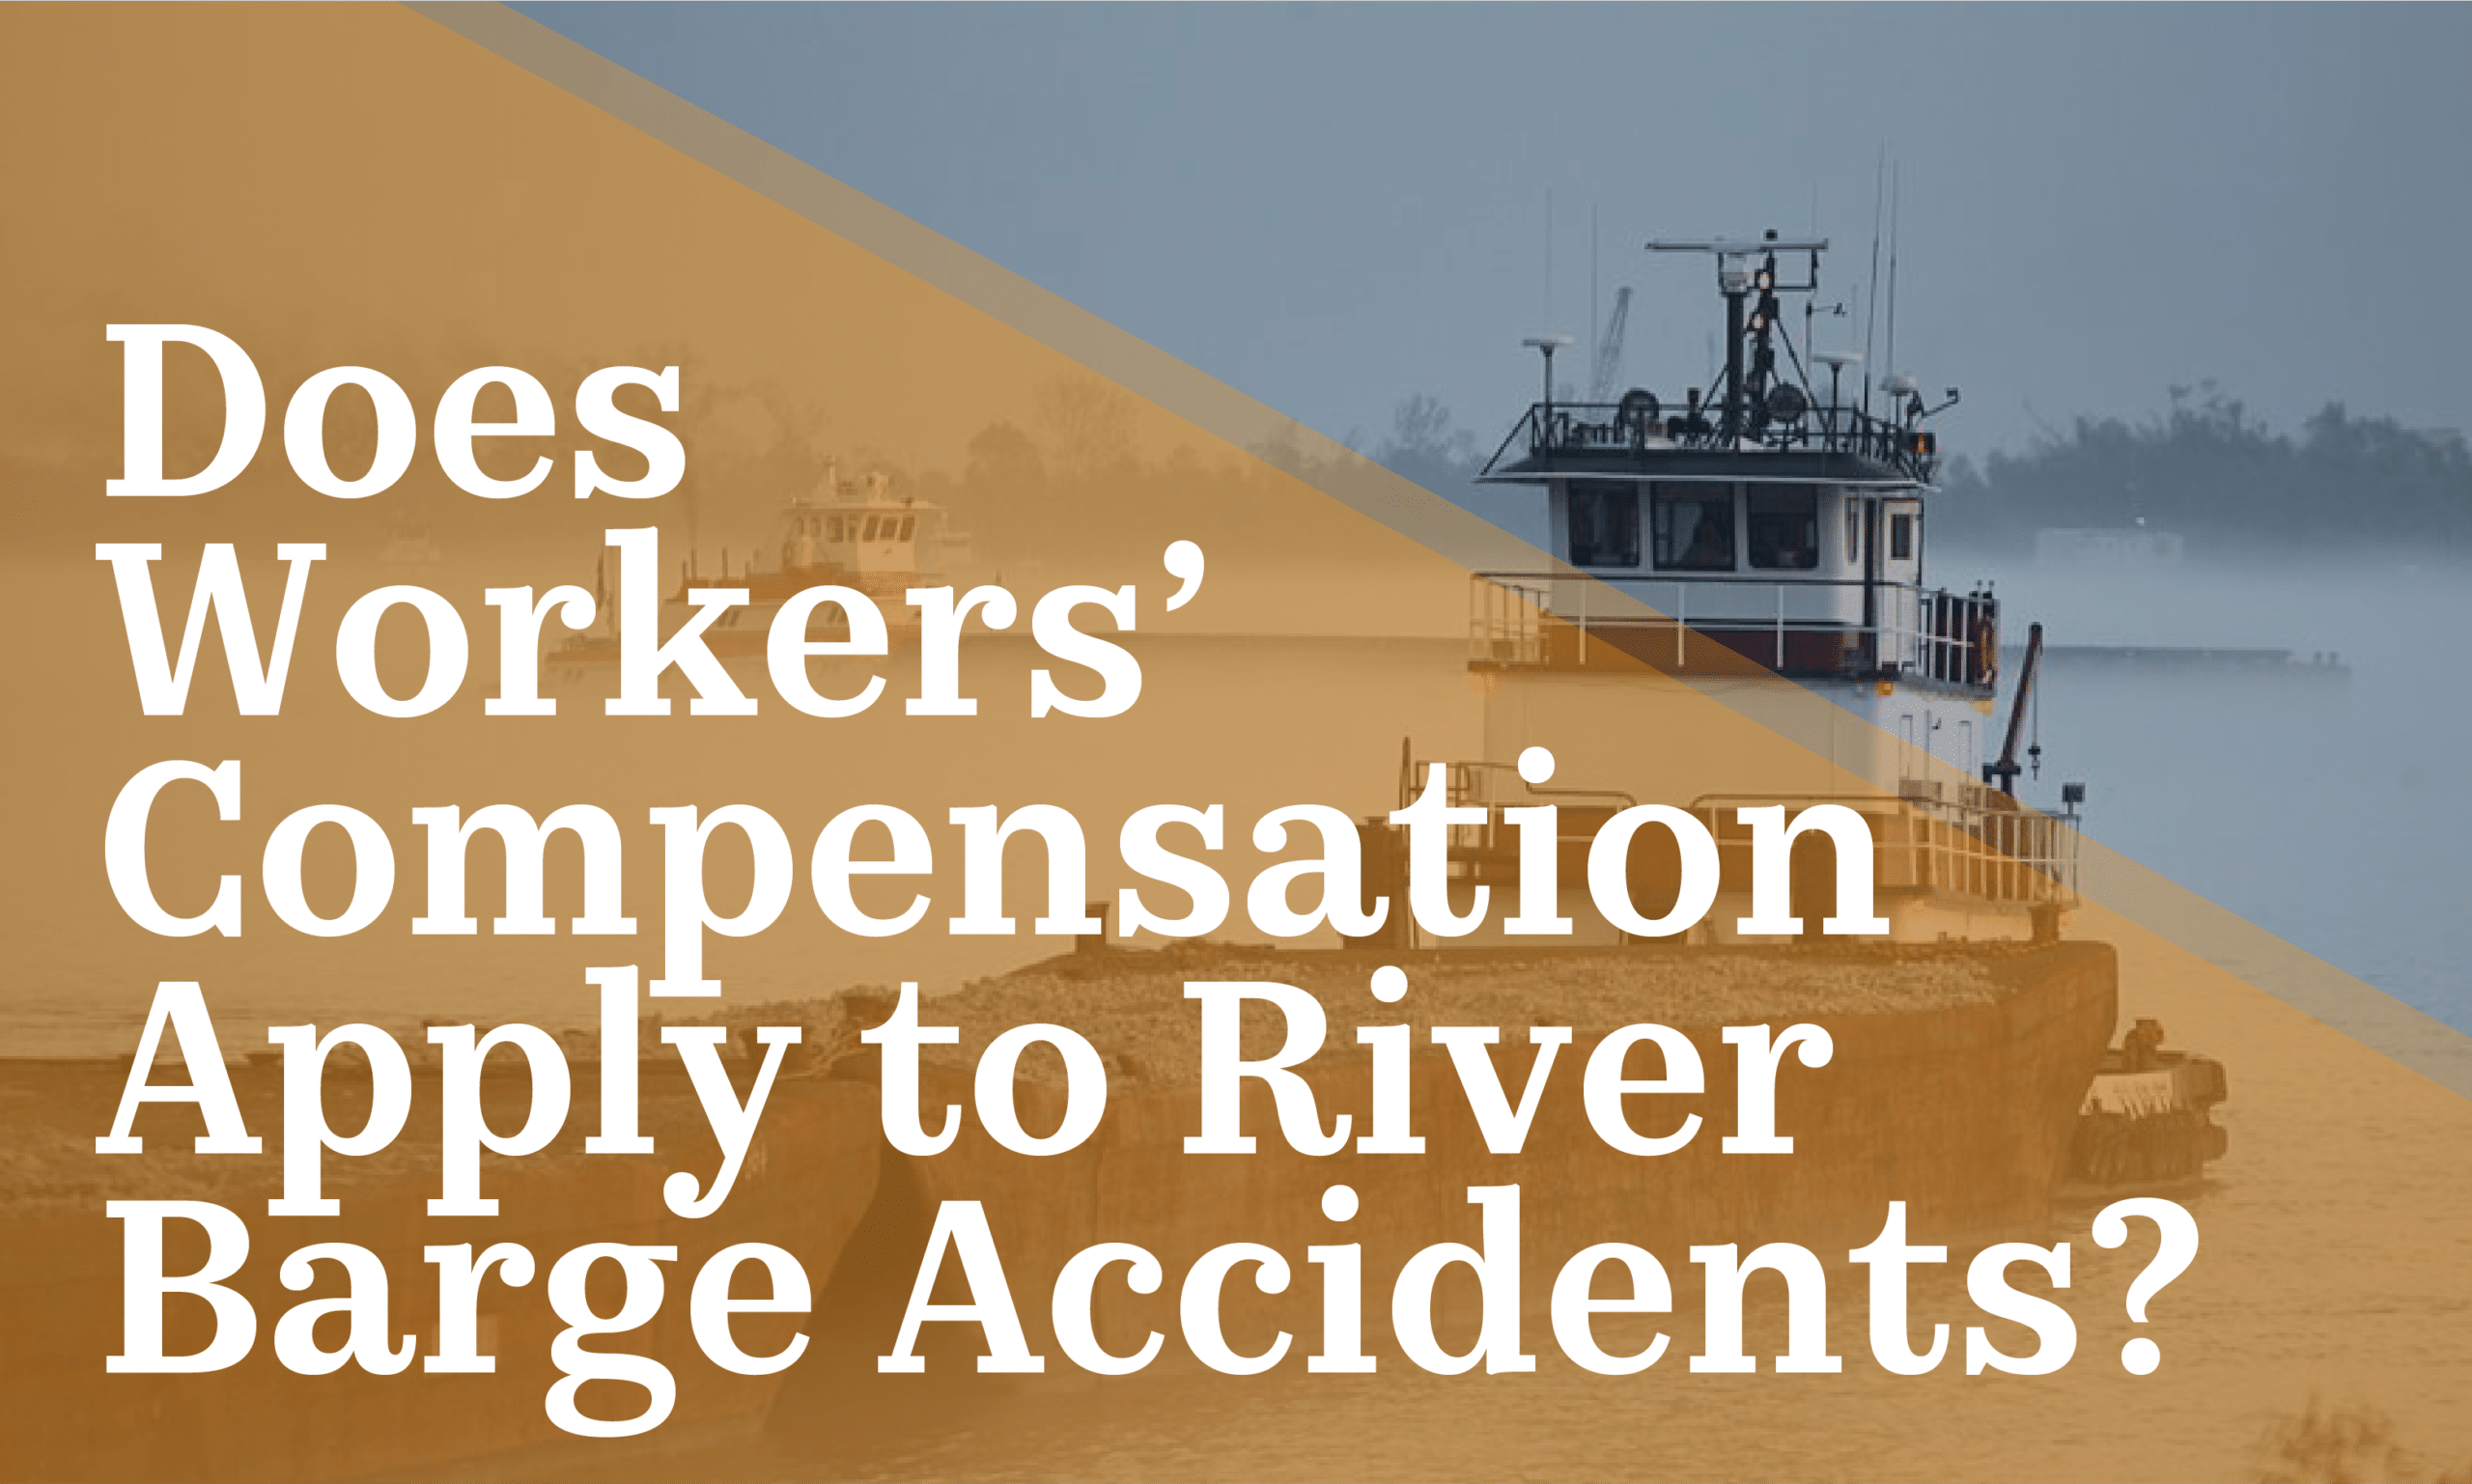 Does workers' compensation apply to river barge accidents?